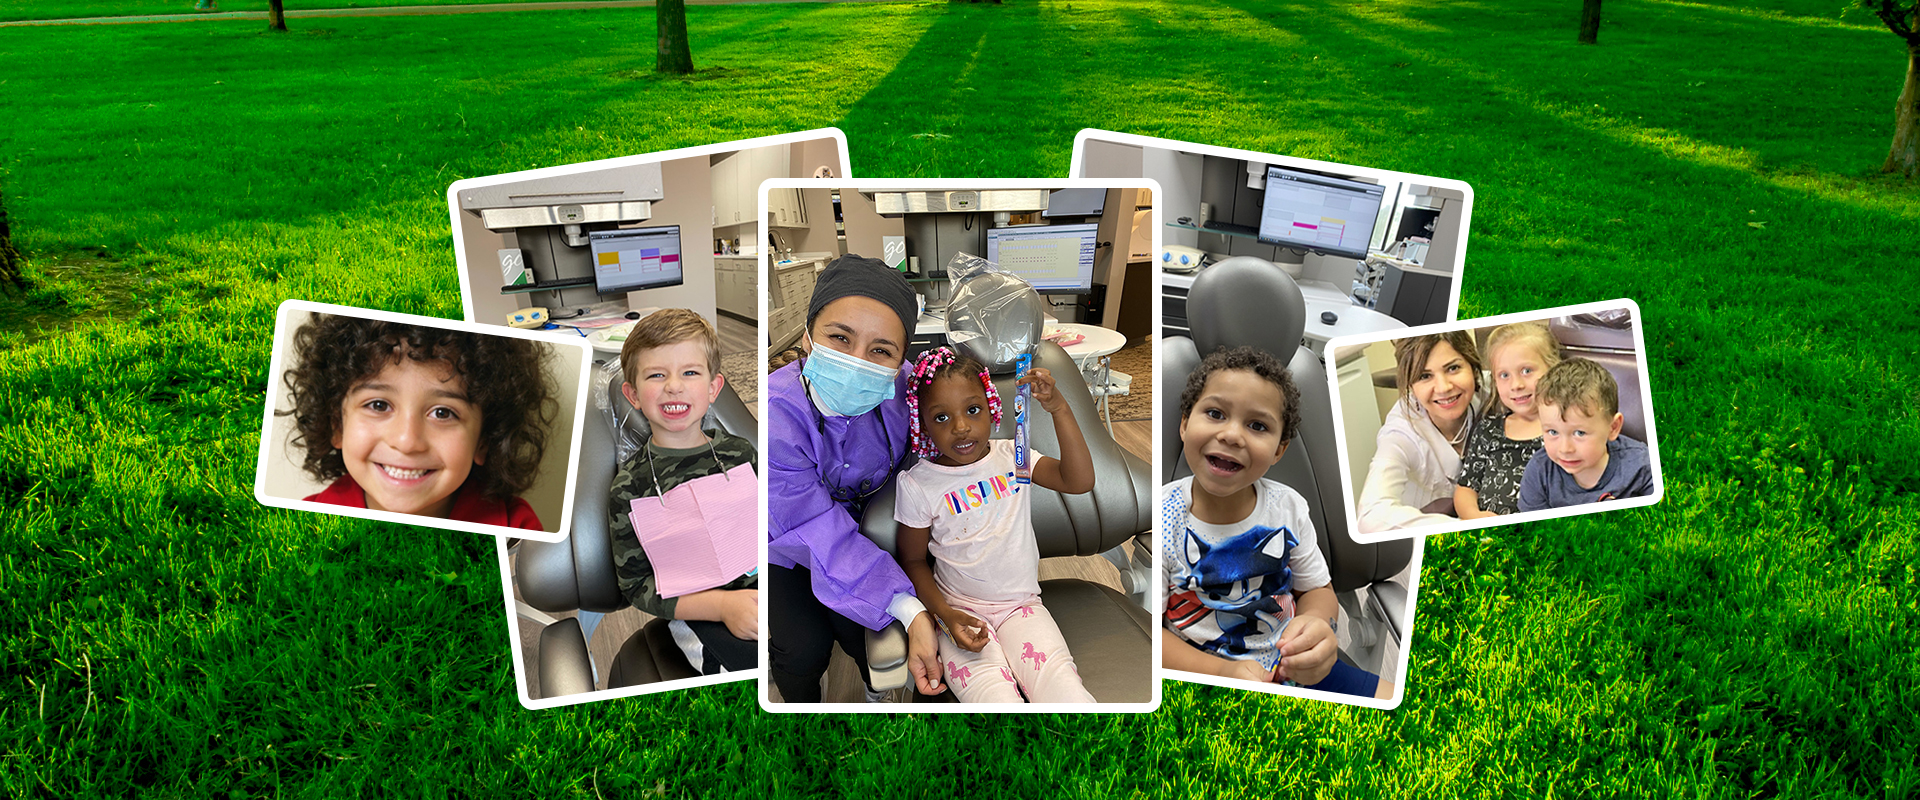 Pediatric Dentistry - Arsmiles Family and Cosmetic Dentistry